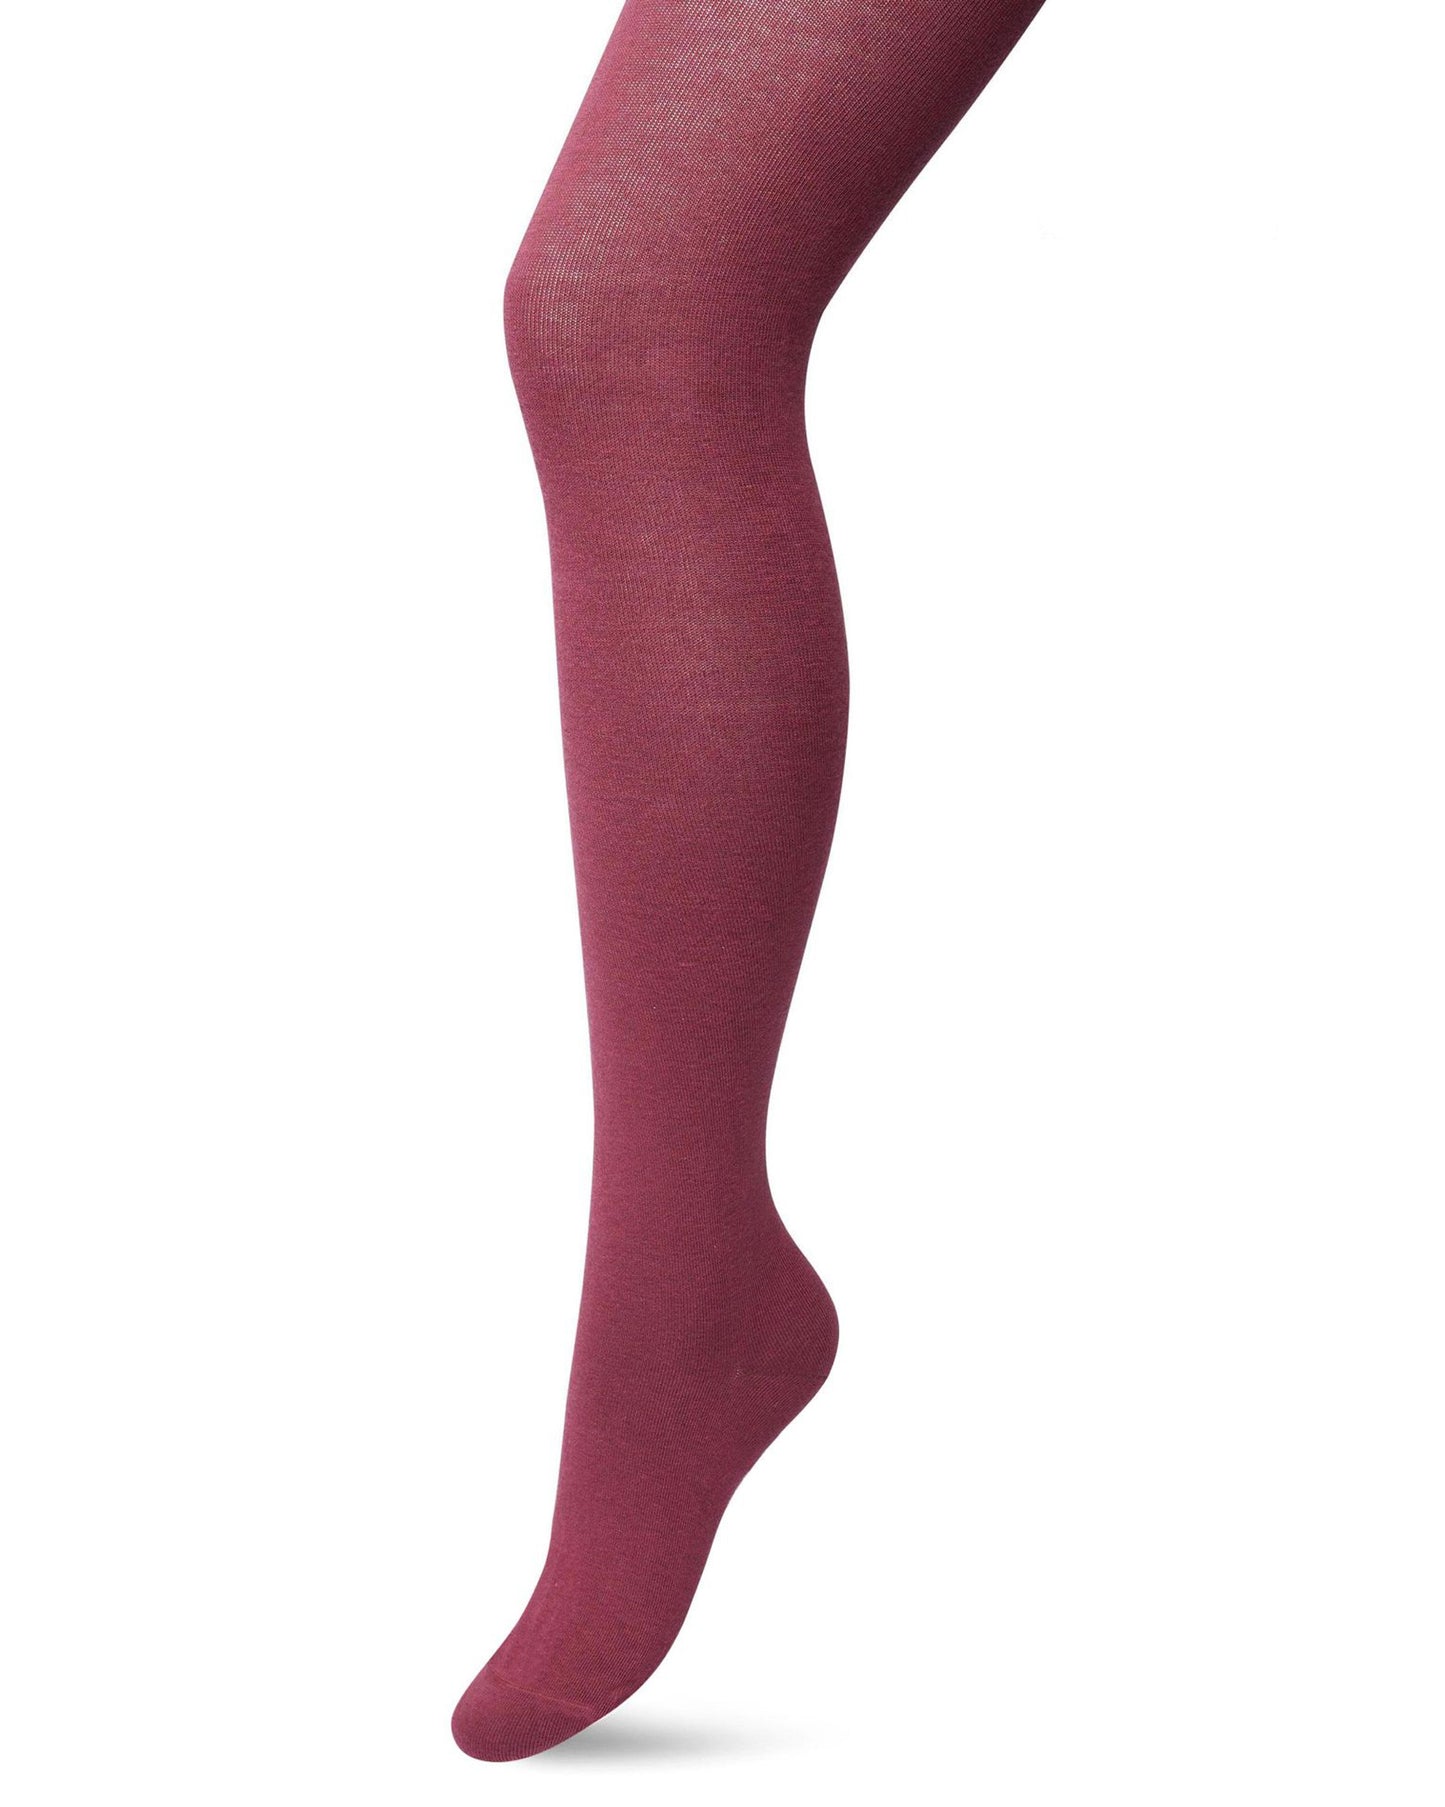 Bonnie Doon Bio Cotton Tights - Dark berry pink (mesa rose) and soft knitted organic cotton Winter thermal tights.